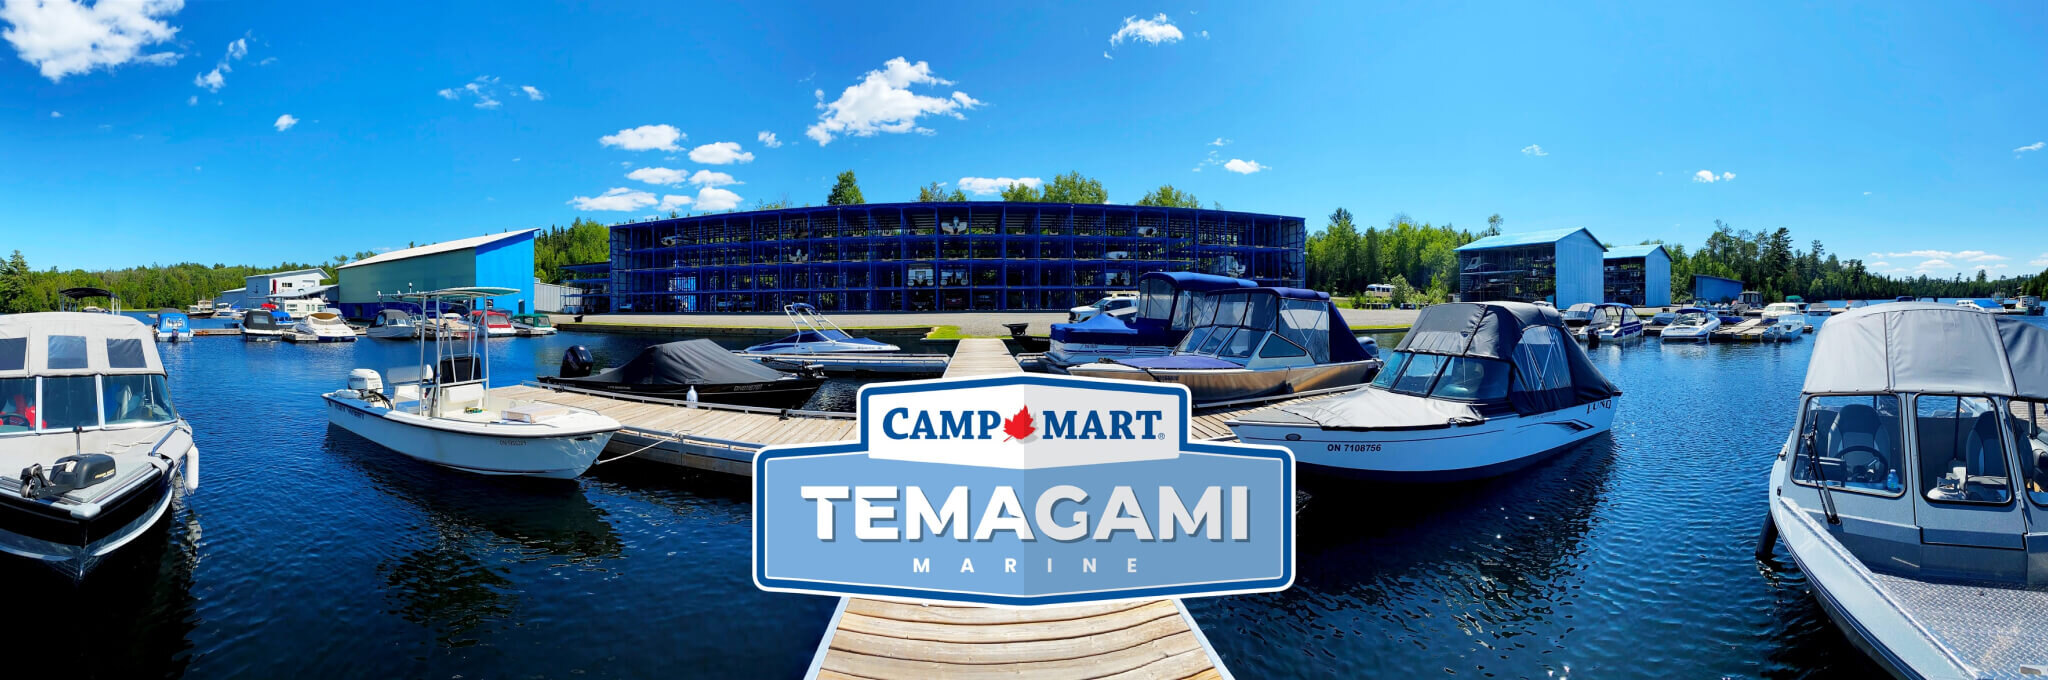 Temagami Marine Meet Our Staff